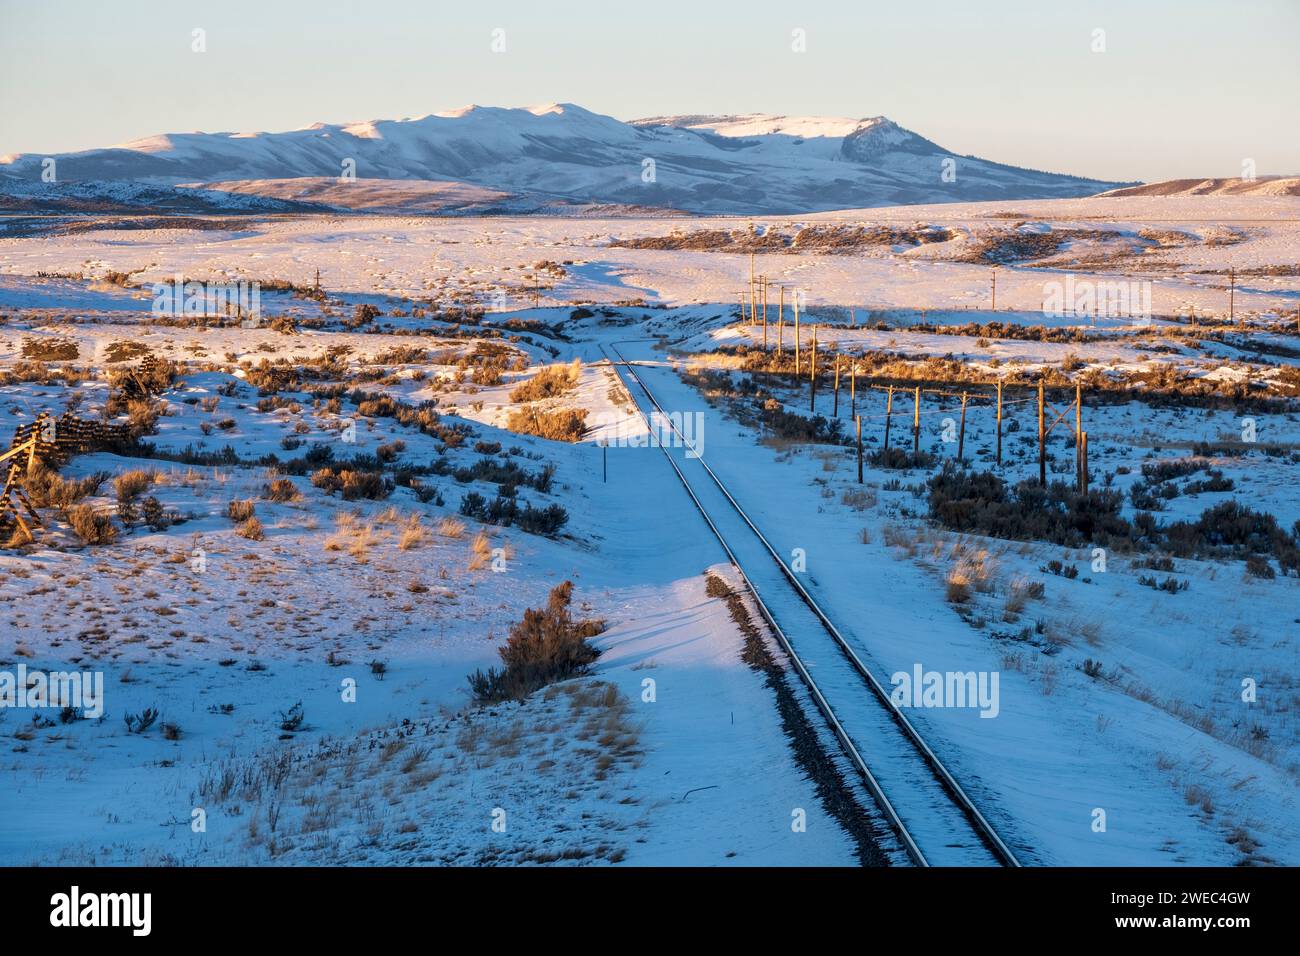 Railroad tracks in the snow running through Kemmerer, Wyoming, USA Stock Photo